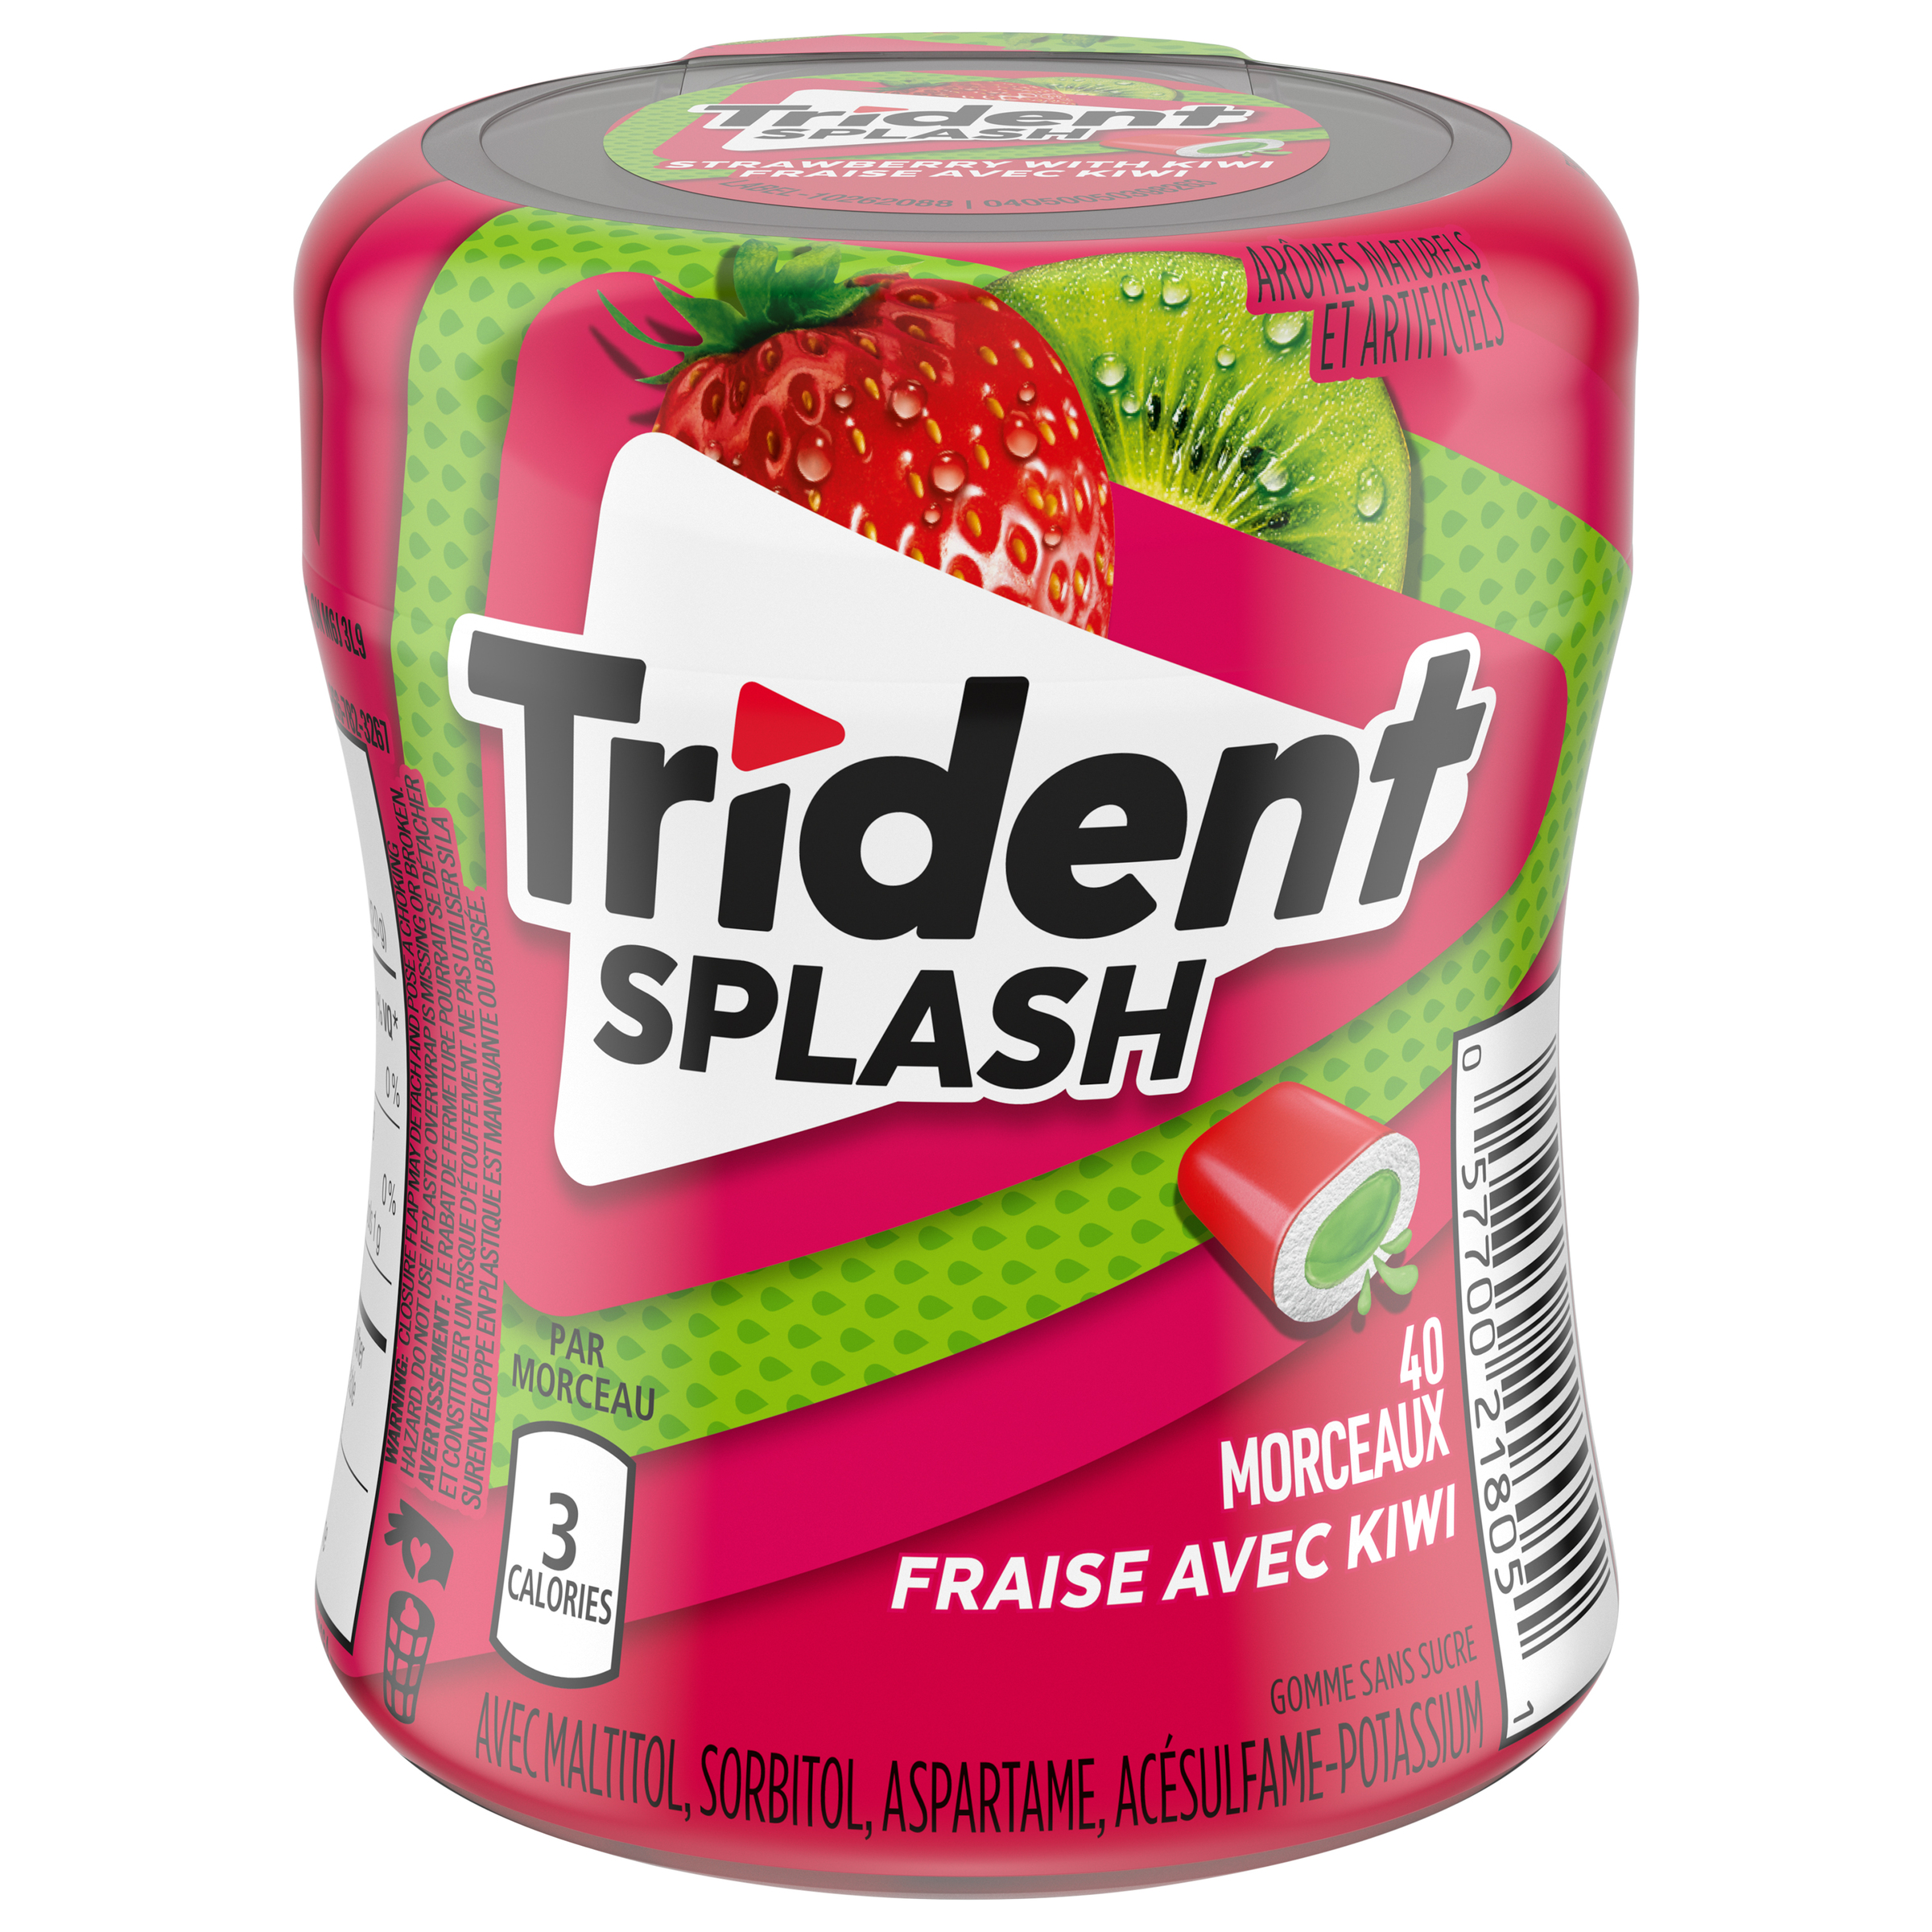 Trident Splash Sugar Free Gum, Strawberry with Lime Flavour, 1 Go-Cup (40 Pieces Total)